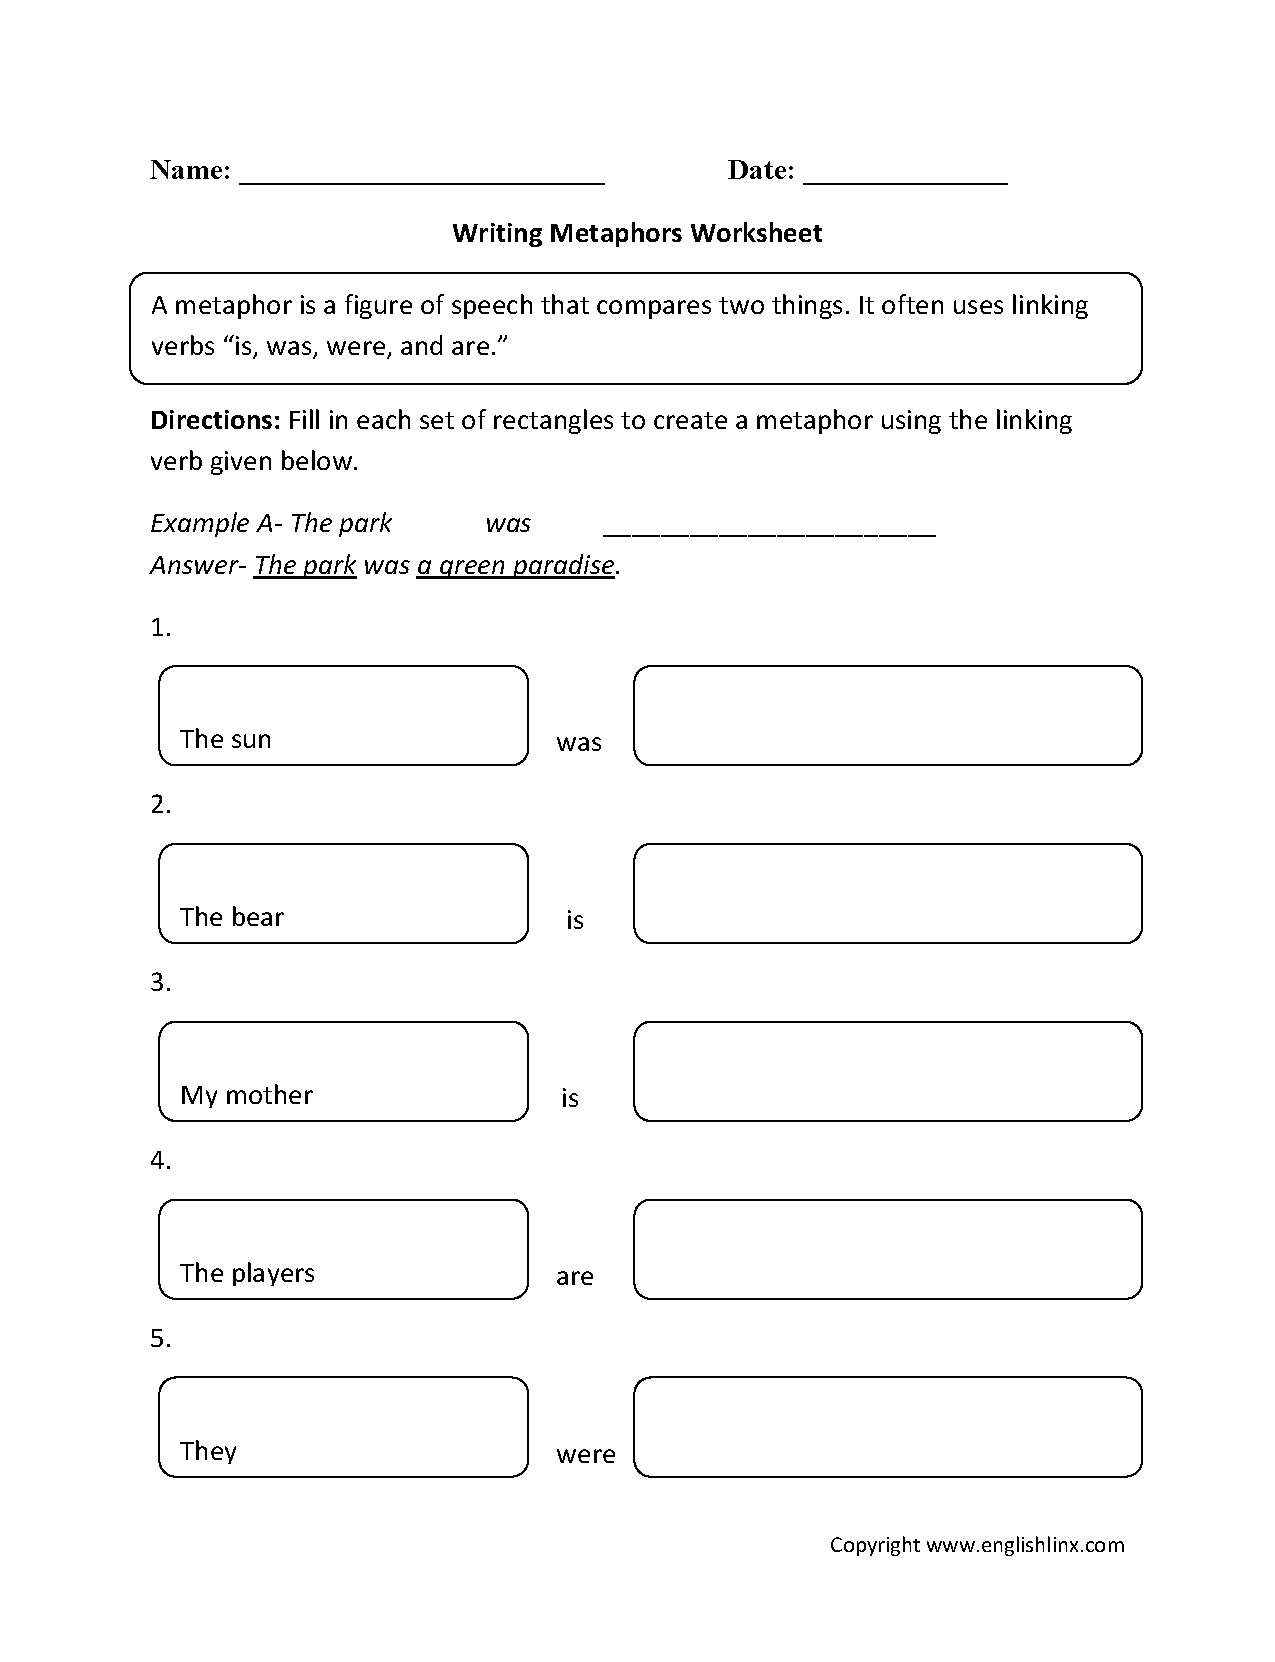 13 Best Images of Metaphors And Similes Worksheets 5th Grade - Similes